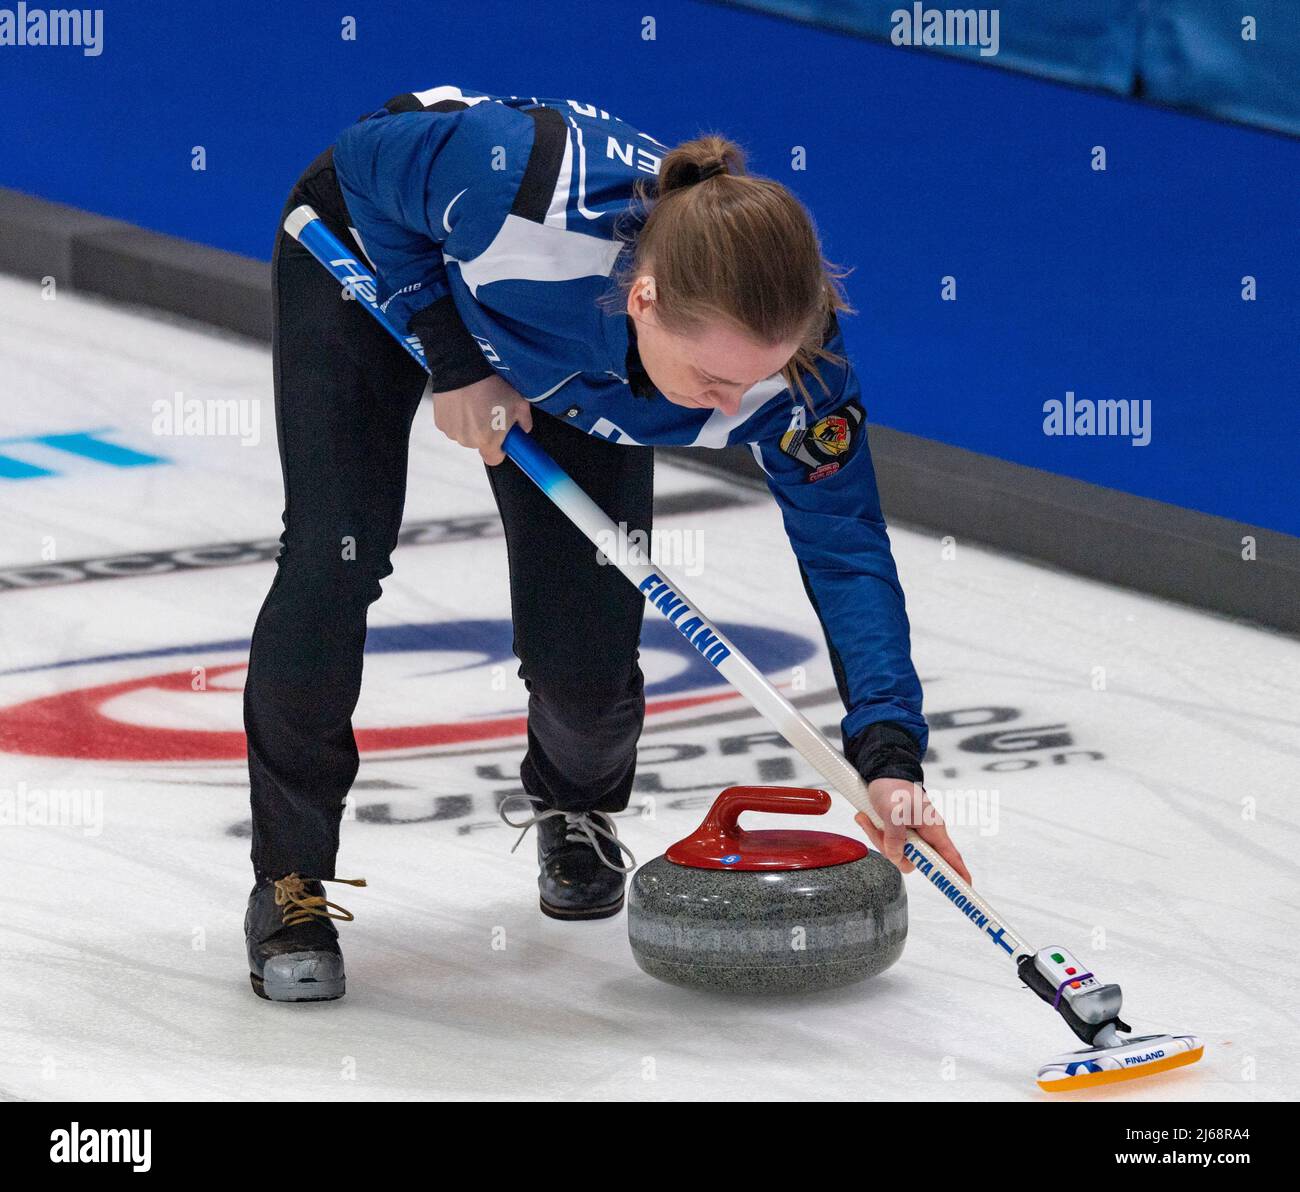 Geneva Switzerland, 29th April 2022 Lotta IMMONEN of Finland is in action during the World Mixed Doubles Curling Championship 2022